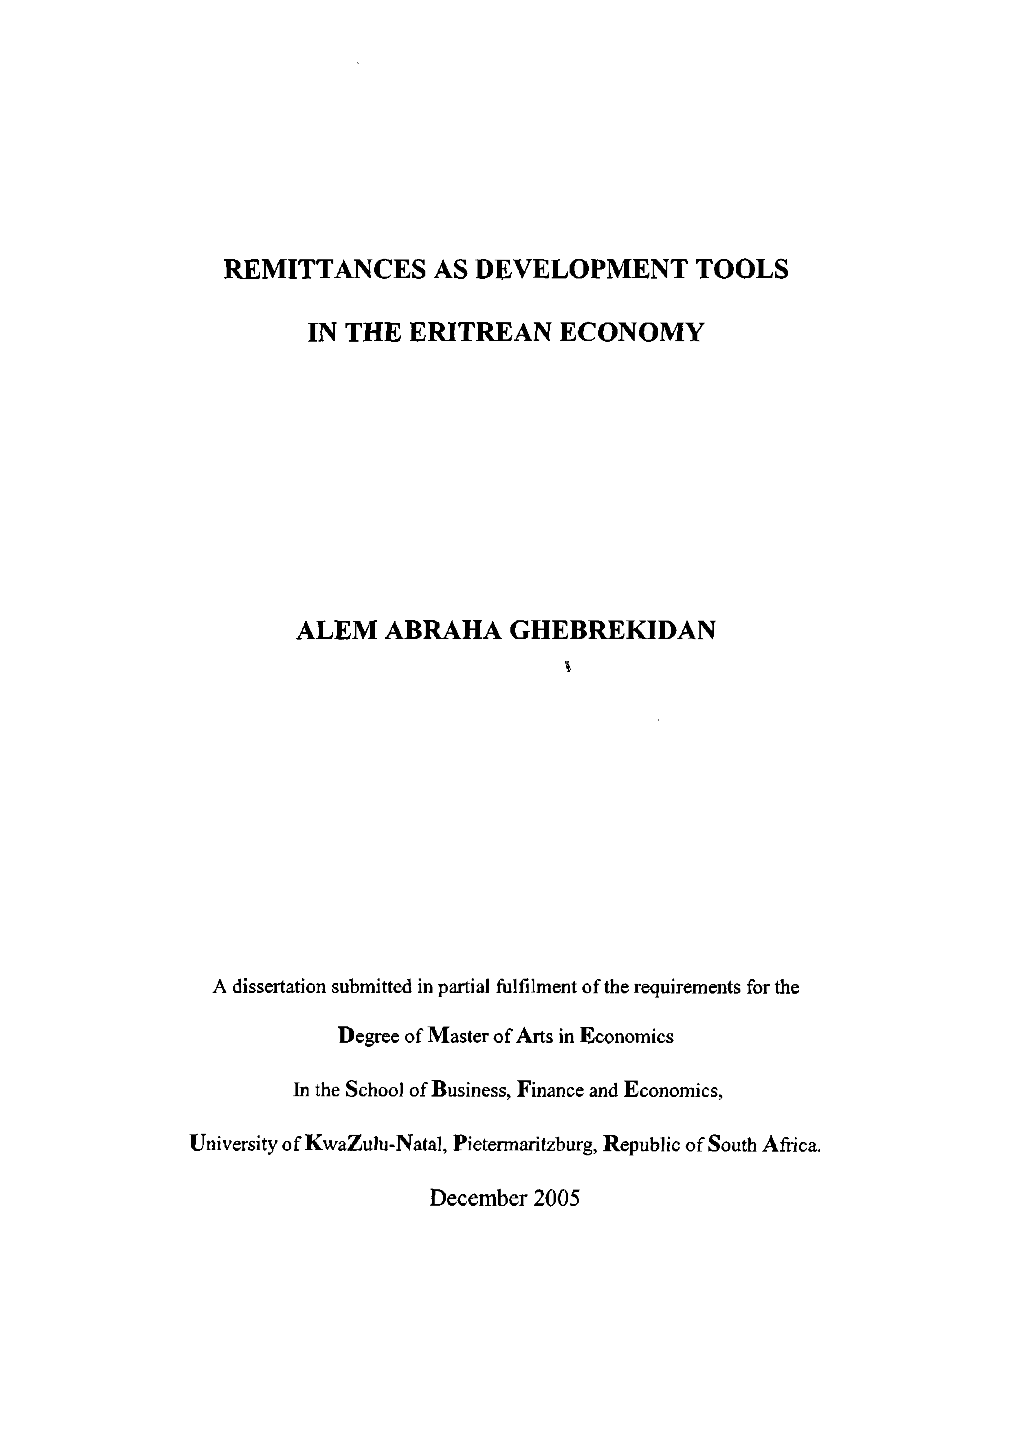 Remittances As Development Tools in the Eritrean Economy